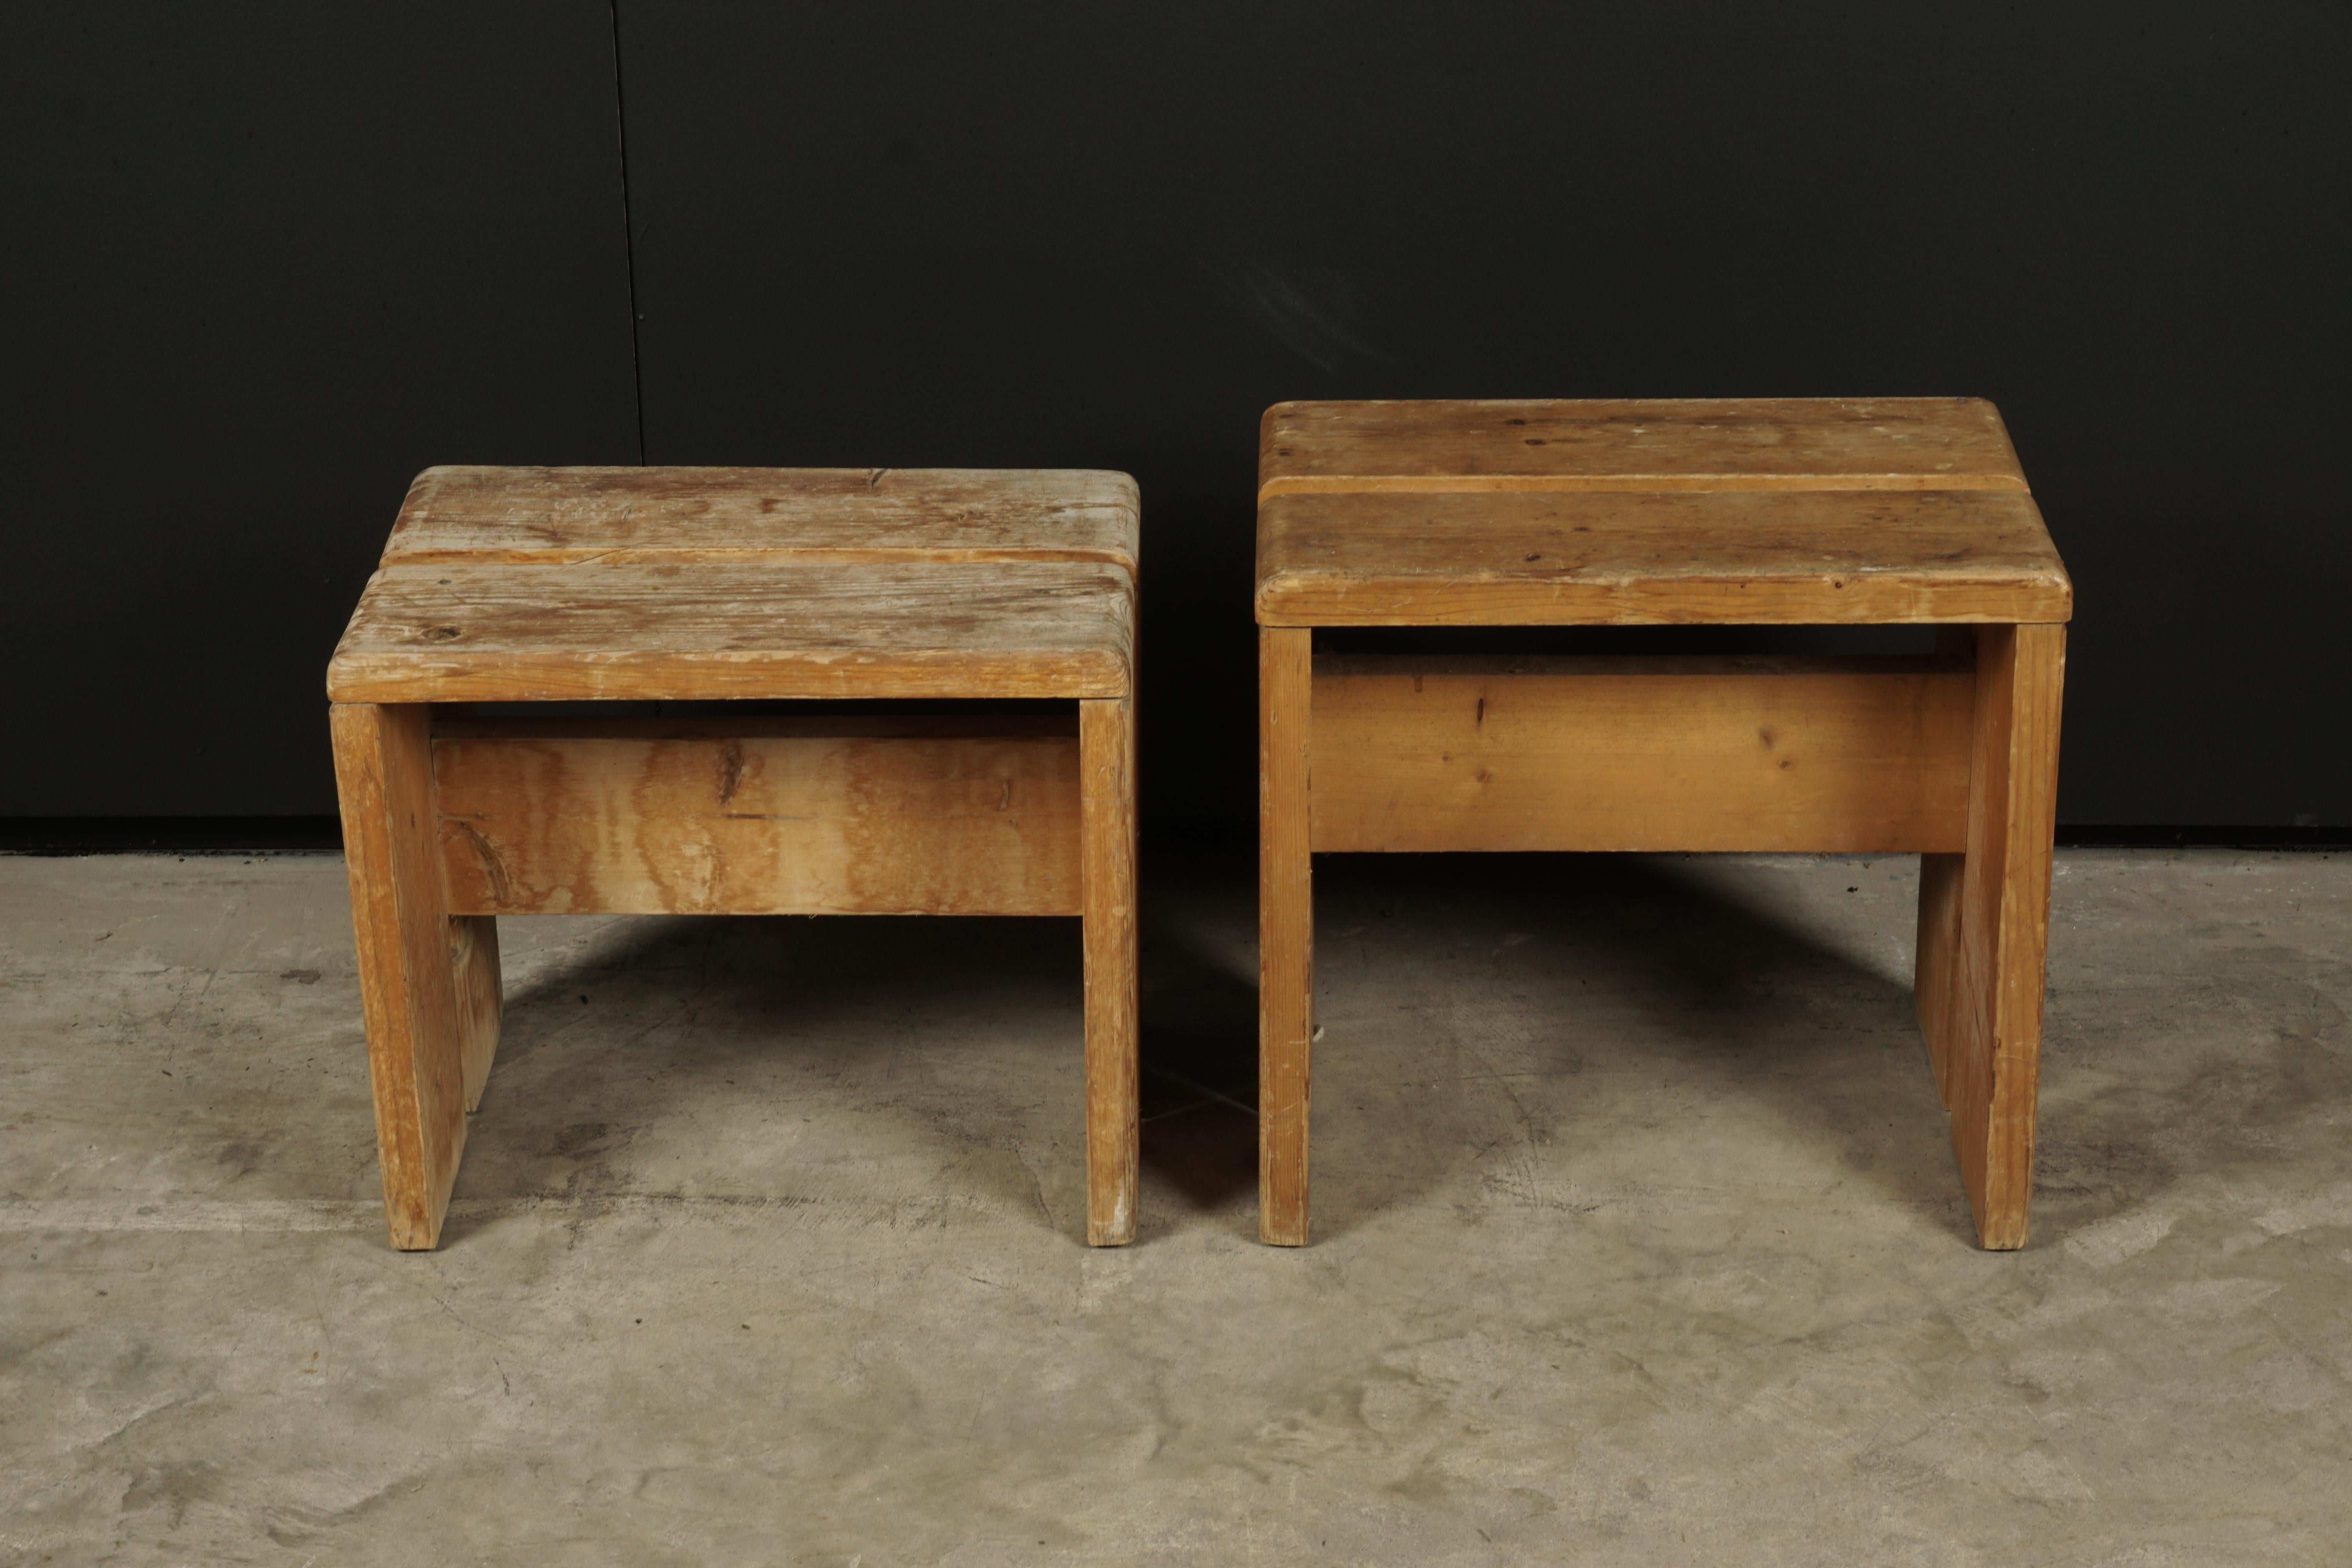 Rare pair of stools by Charlotte Perriand for Les Arcs Ski Resort, circa 1960. Solid pine construction. One stool has been cut and lowered many years ago. See images.
Measures: Second stool height 15